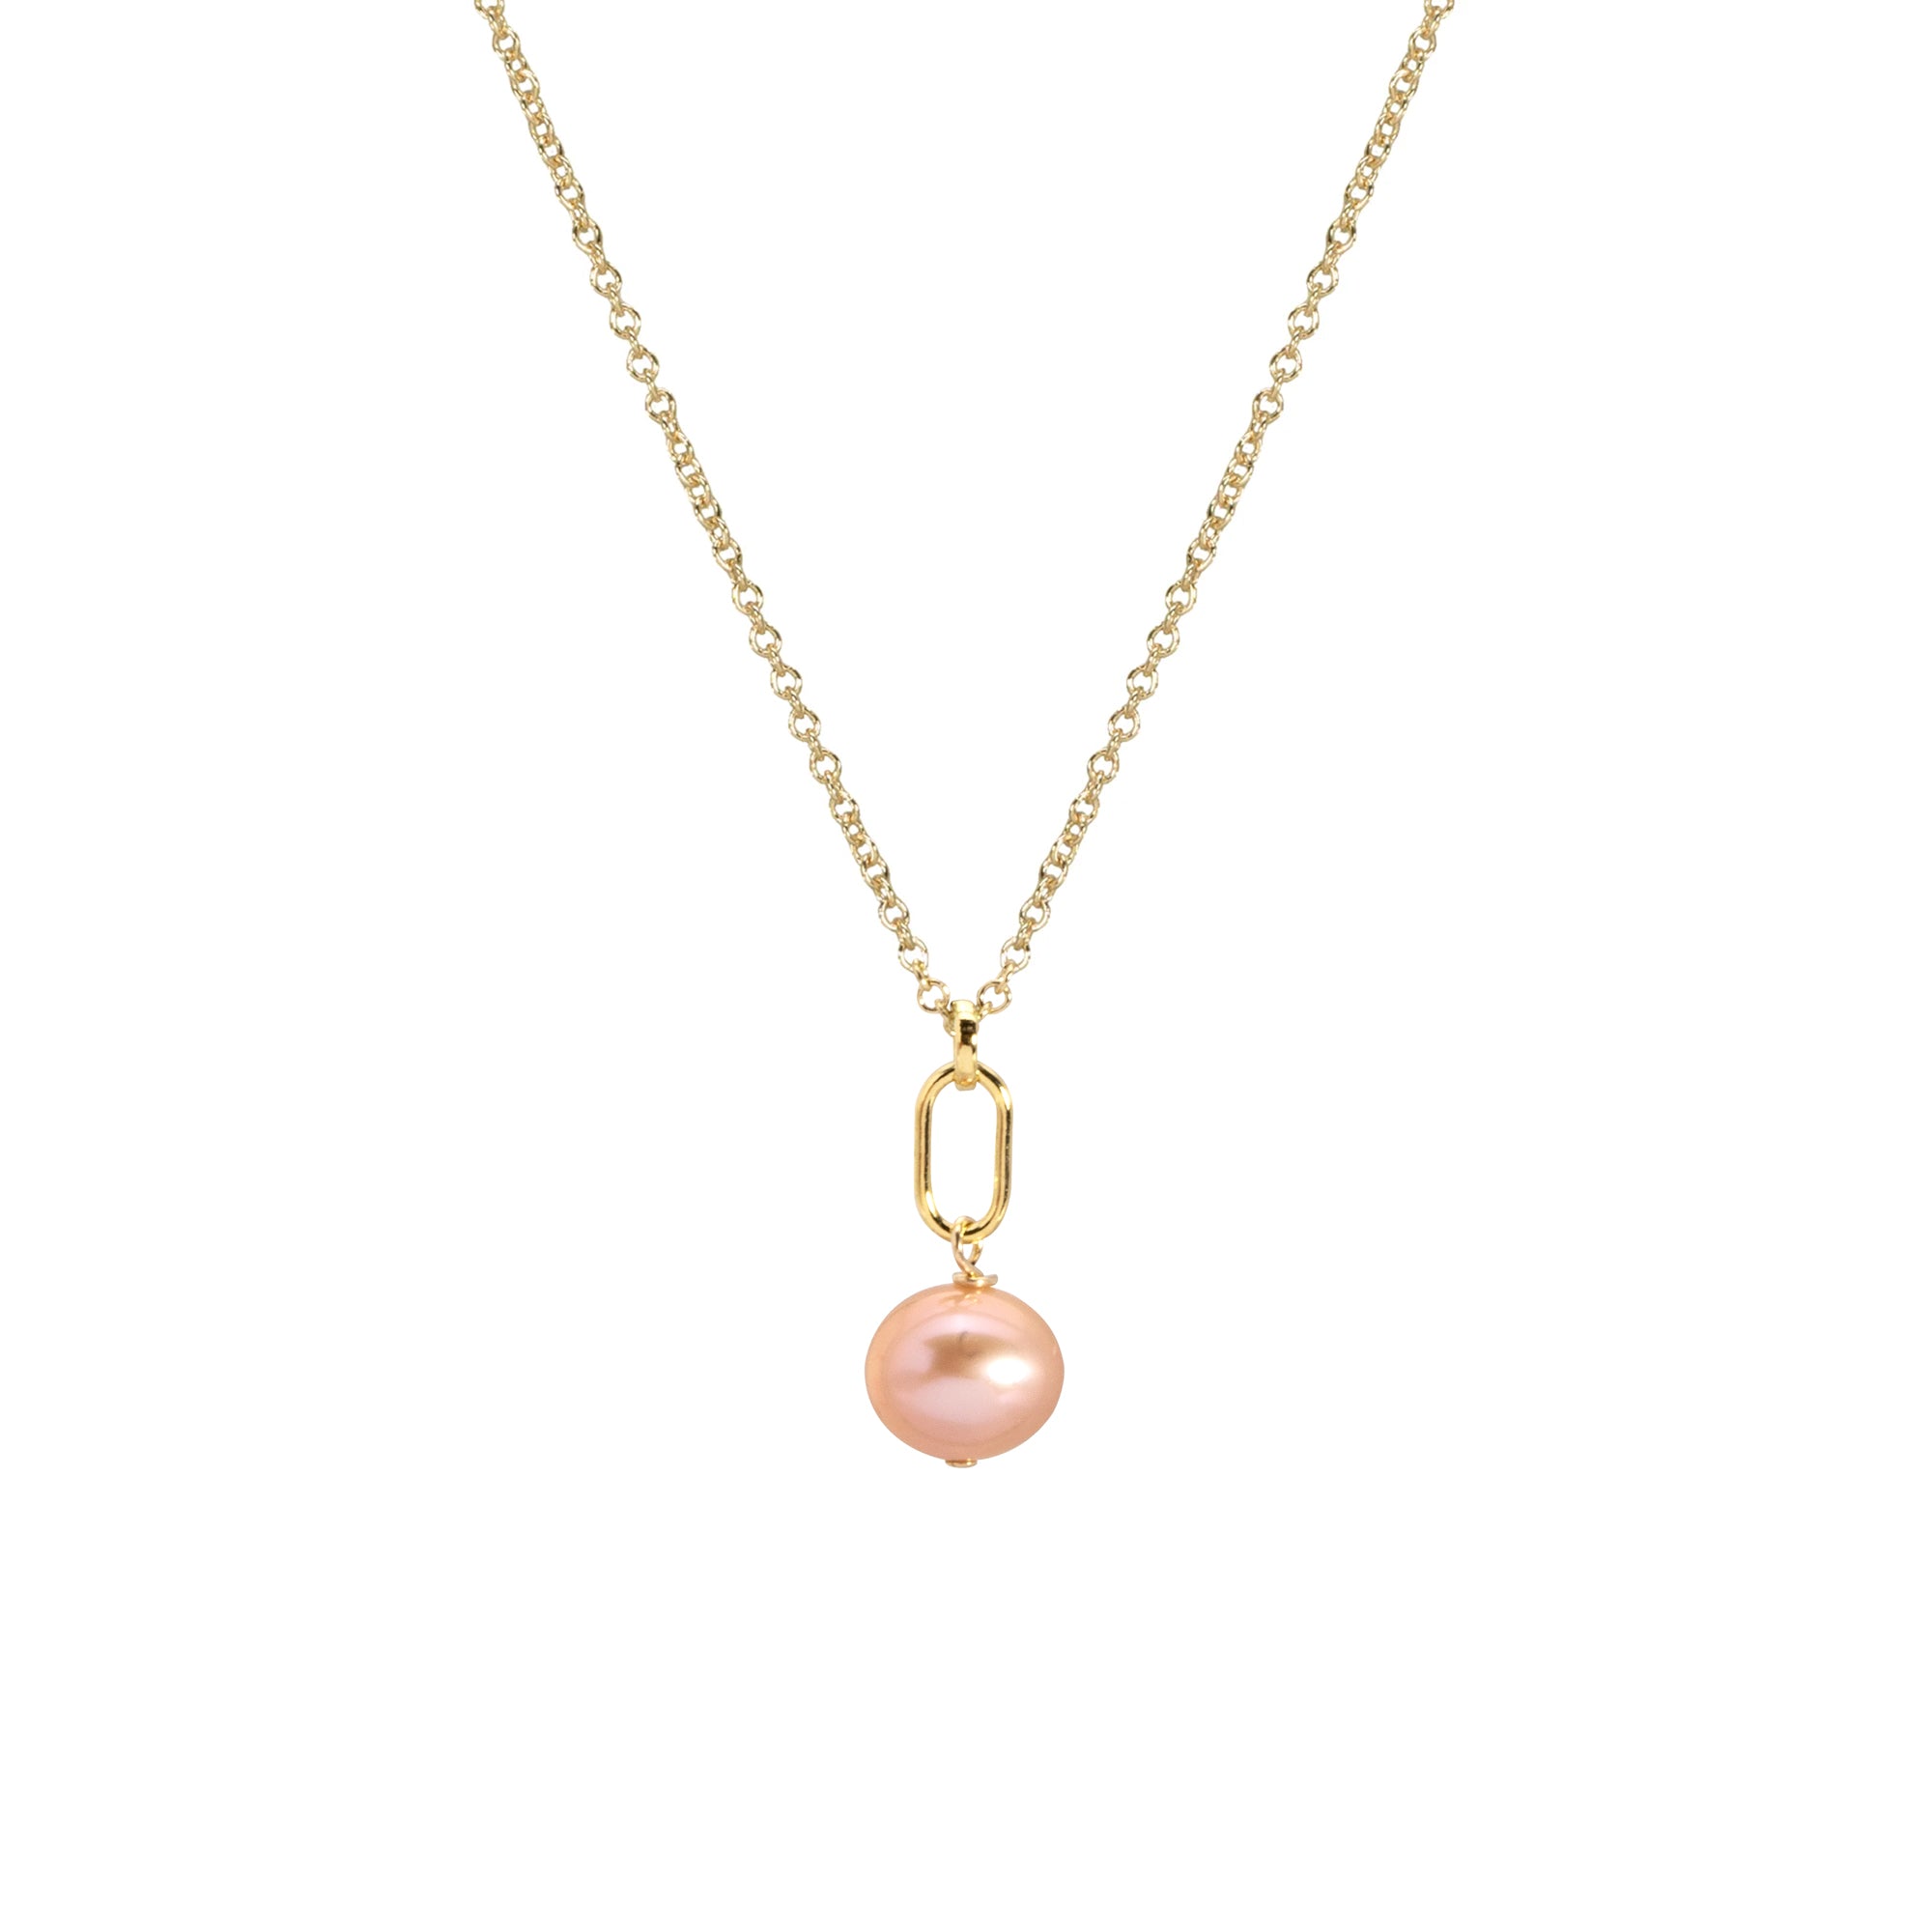 Breast Cancer Awareness pink pearl drop necklace